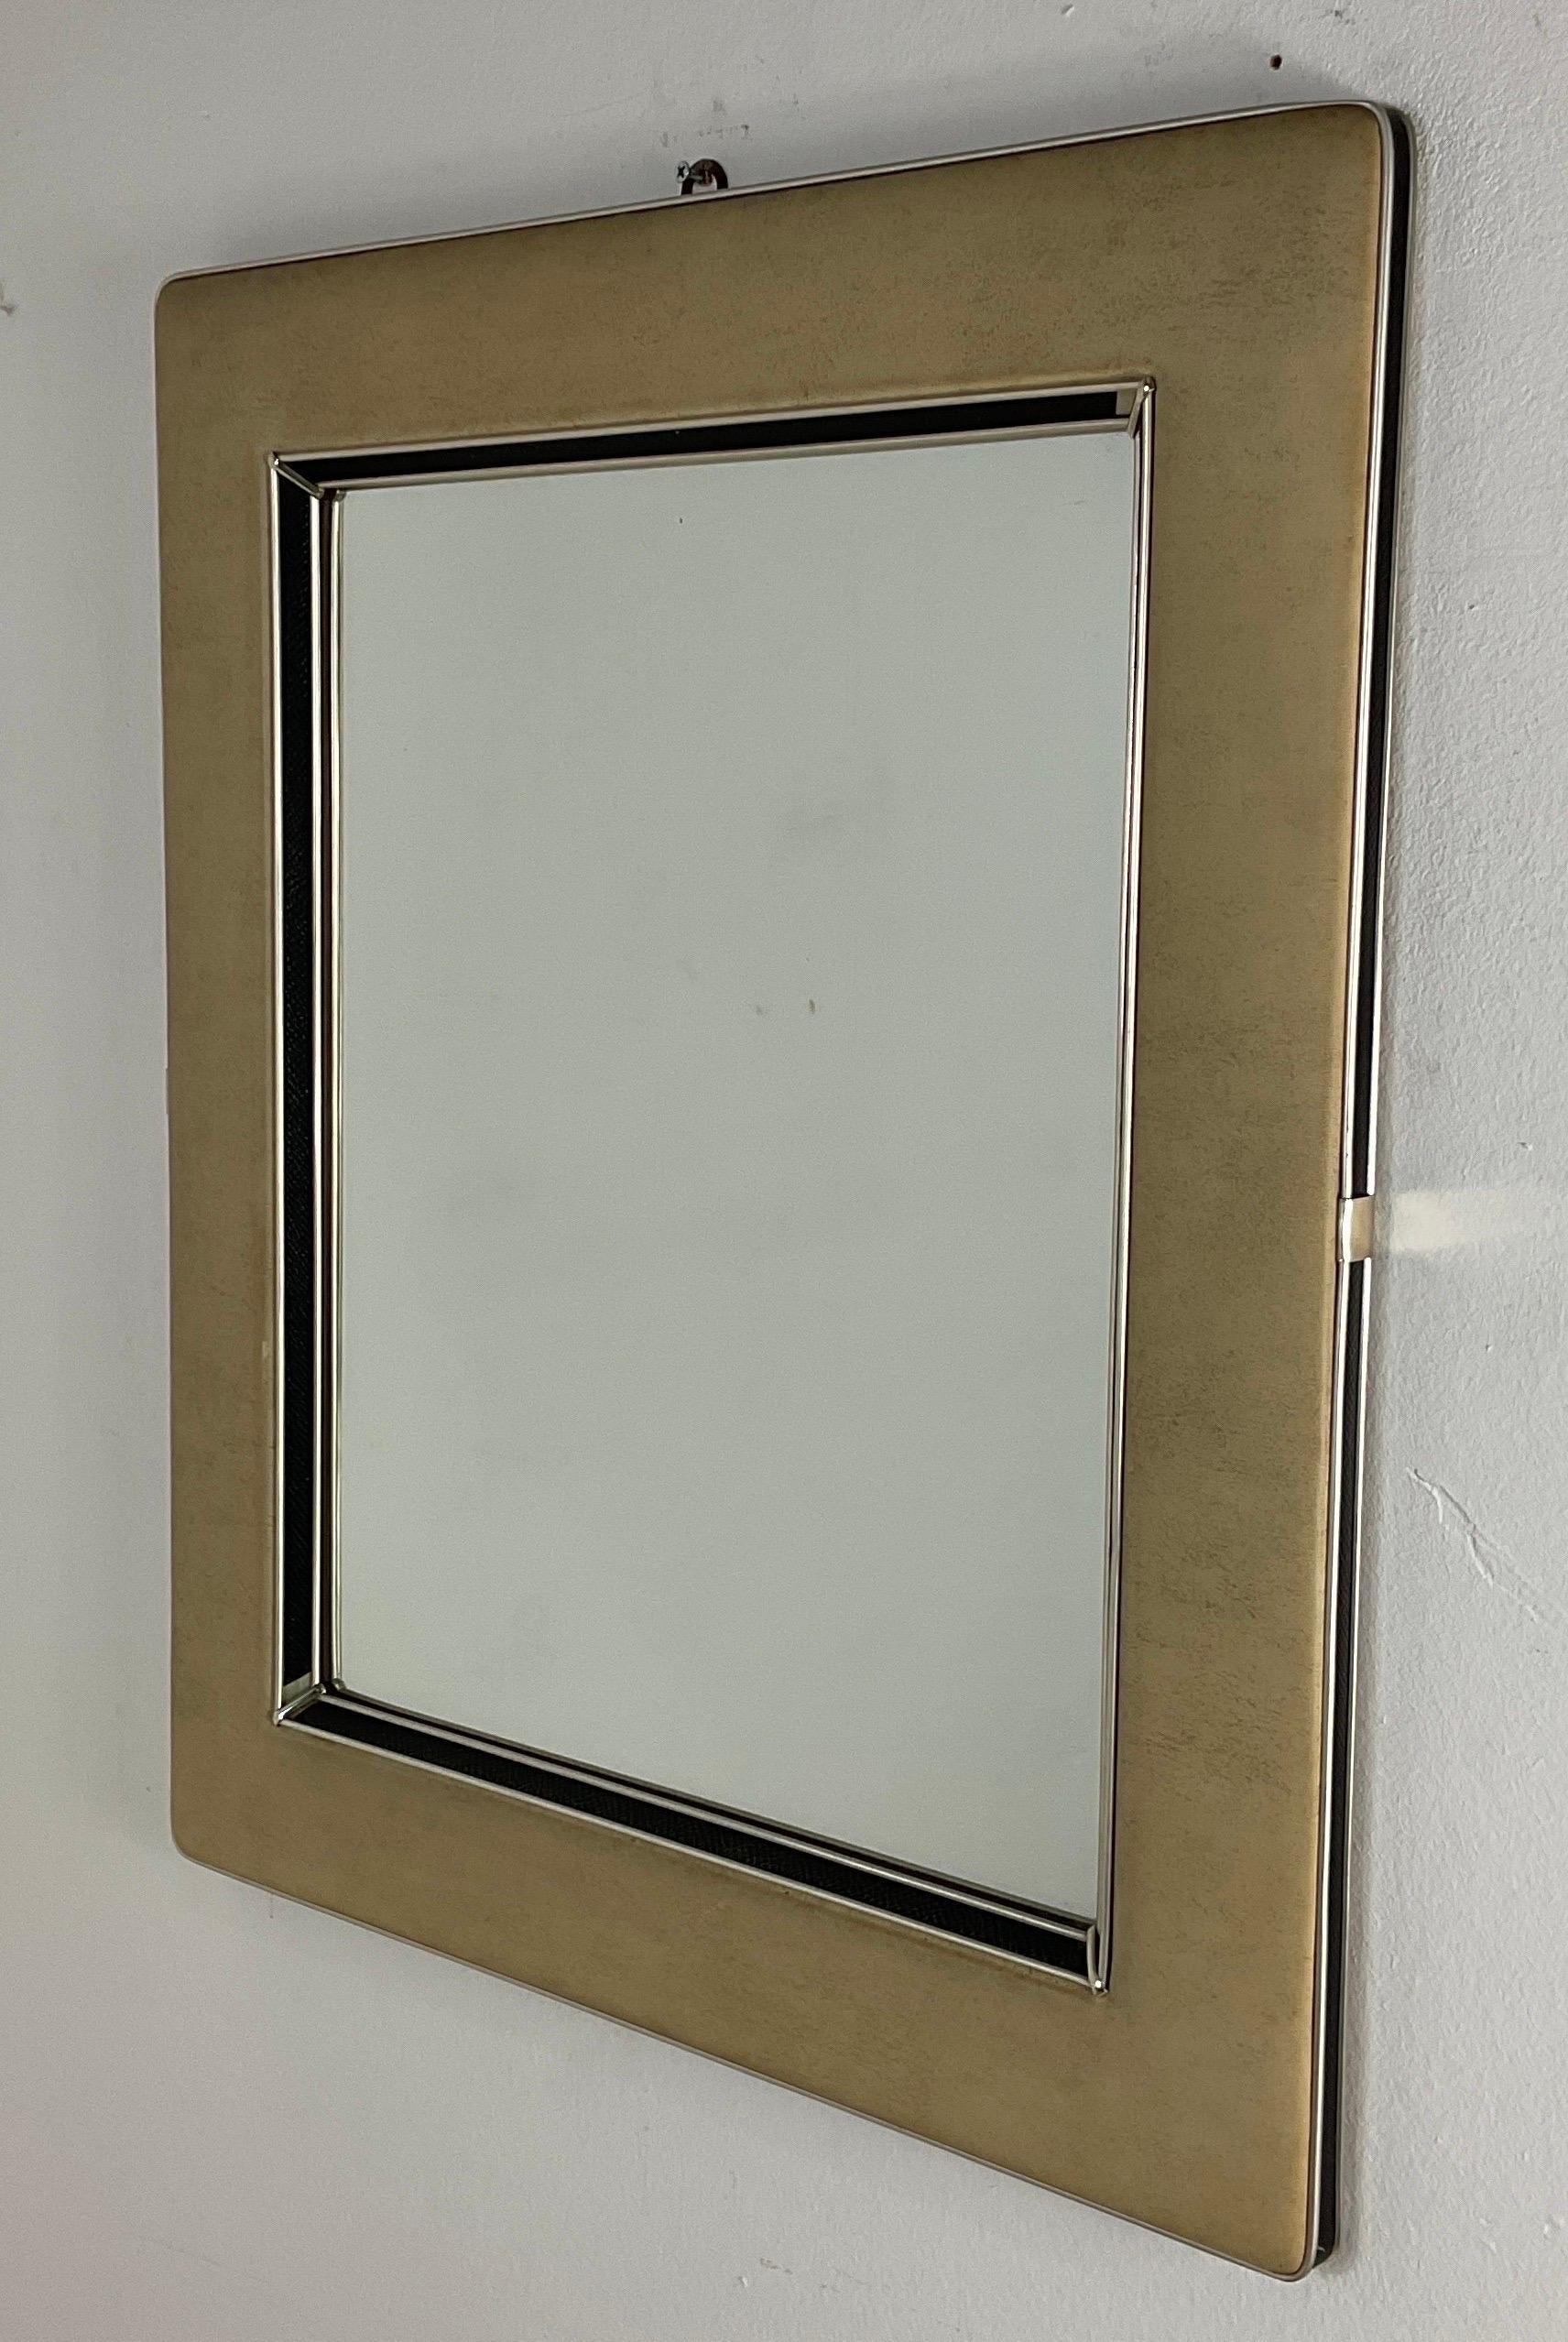 Rare mirror by Umberto Mascagni of the fifties. Wooden frame with vinyl leather frame. Good condition.